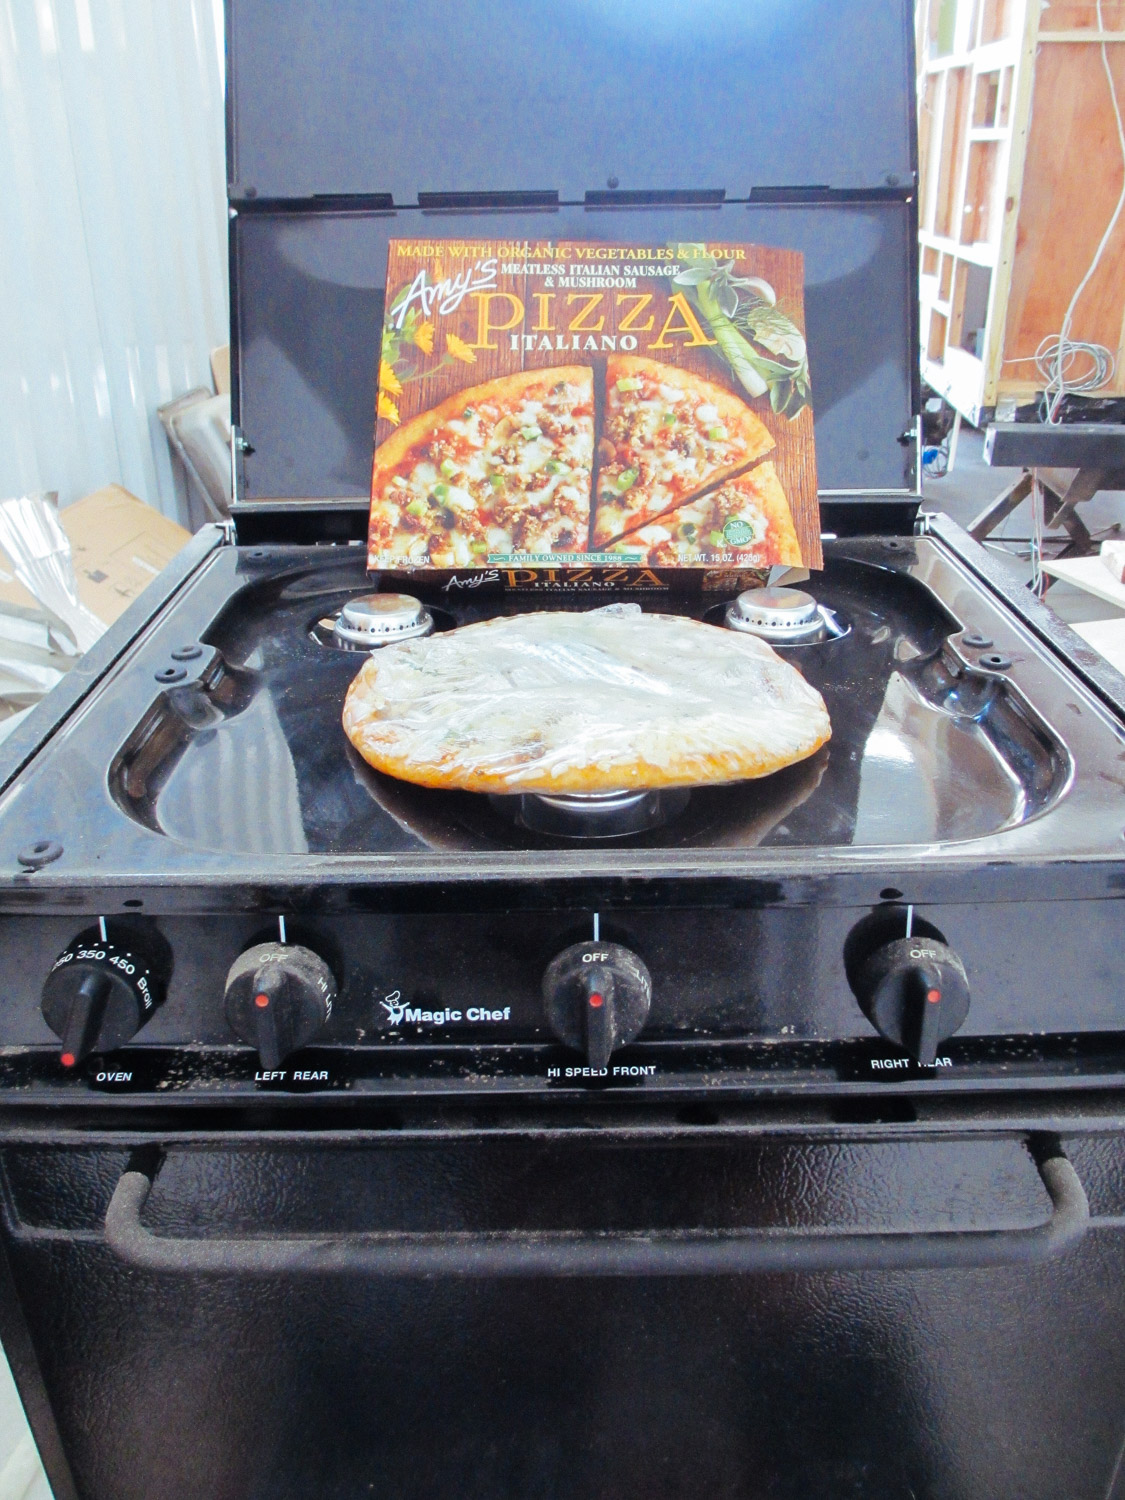  We made sure the RV stove/oven could actually run of camping propane fuel bottles by heating up a frozen pizza. 